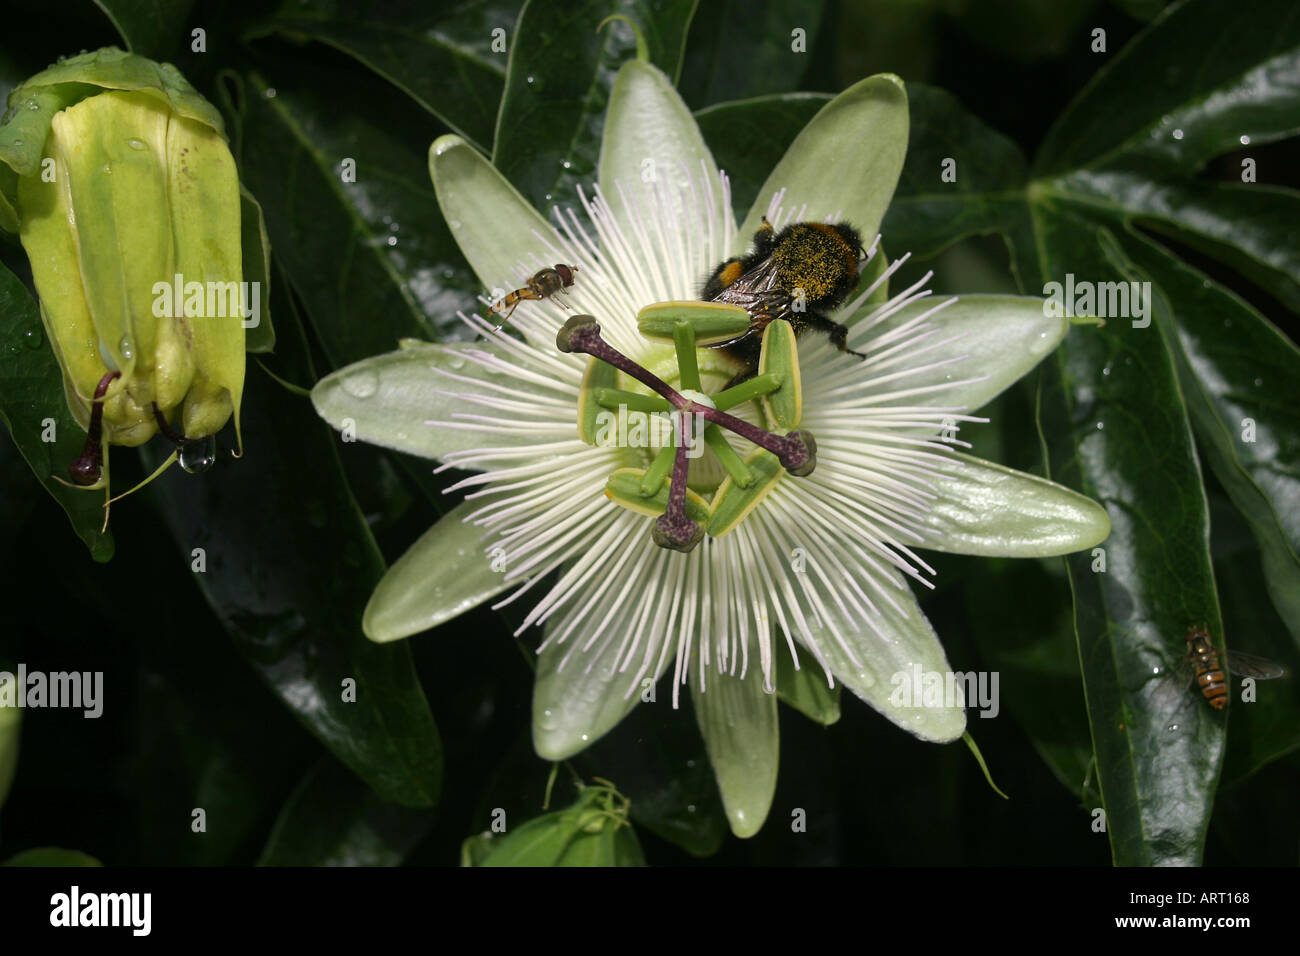 Passiflora caerulea, Passion flower, blue passion flower, common passionflower. fast growing evergreen or semi evergreen, woody stemmed tendril climber. White flowers with purple banded crowns Stock Photo